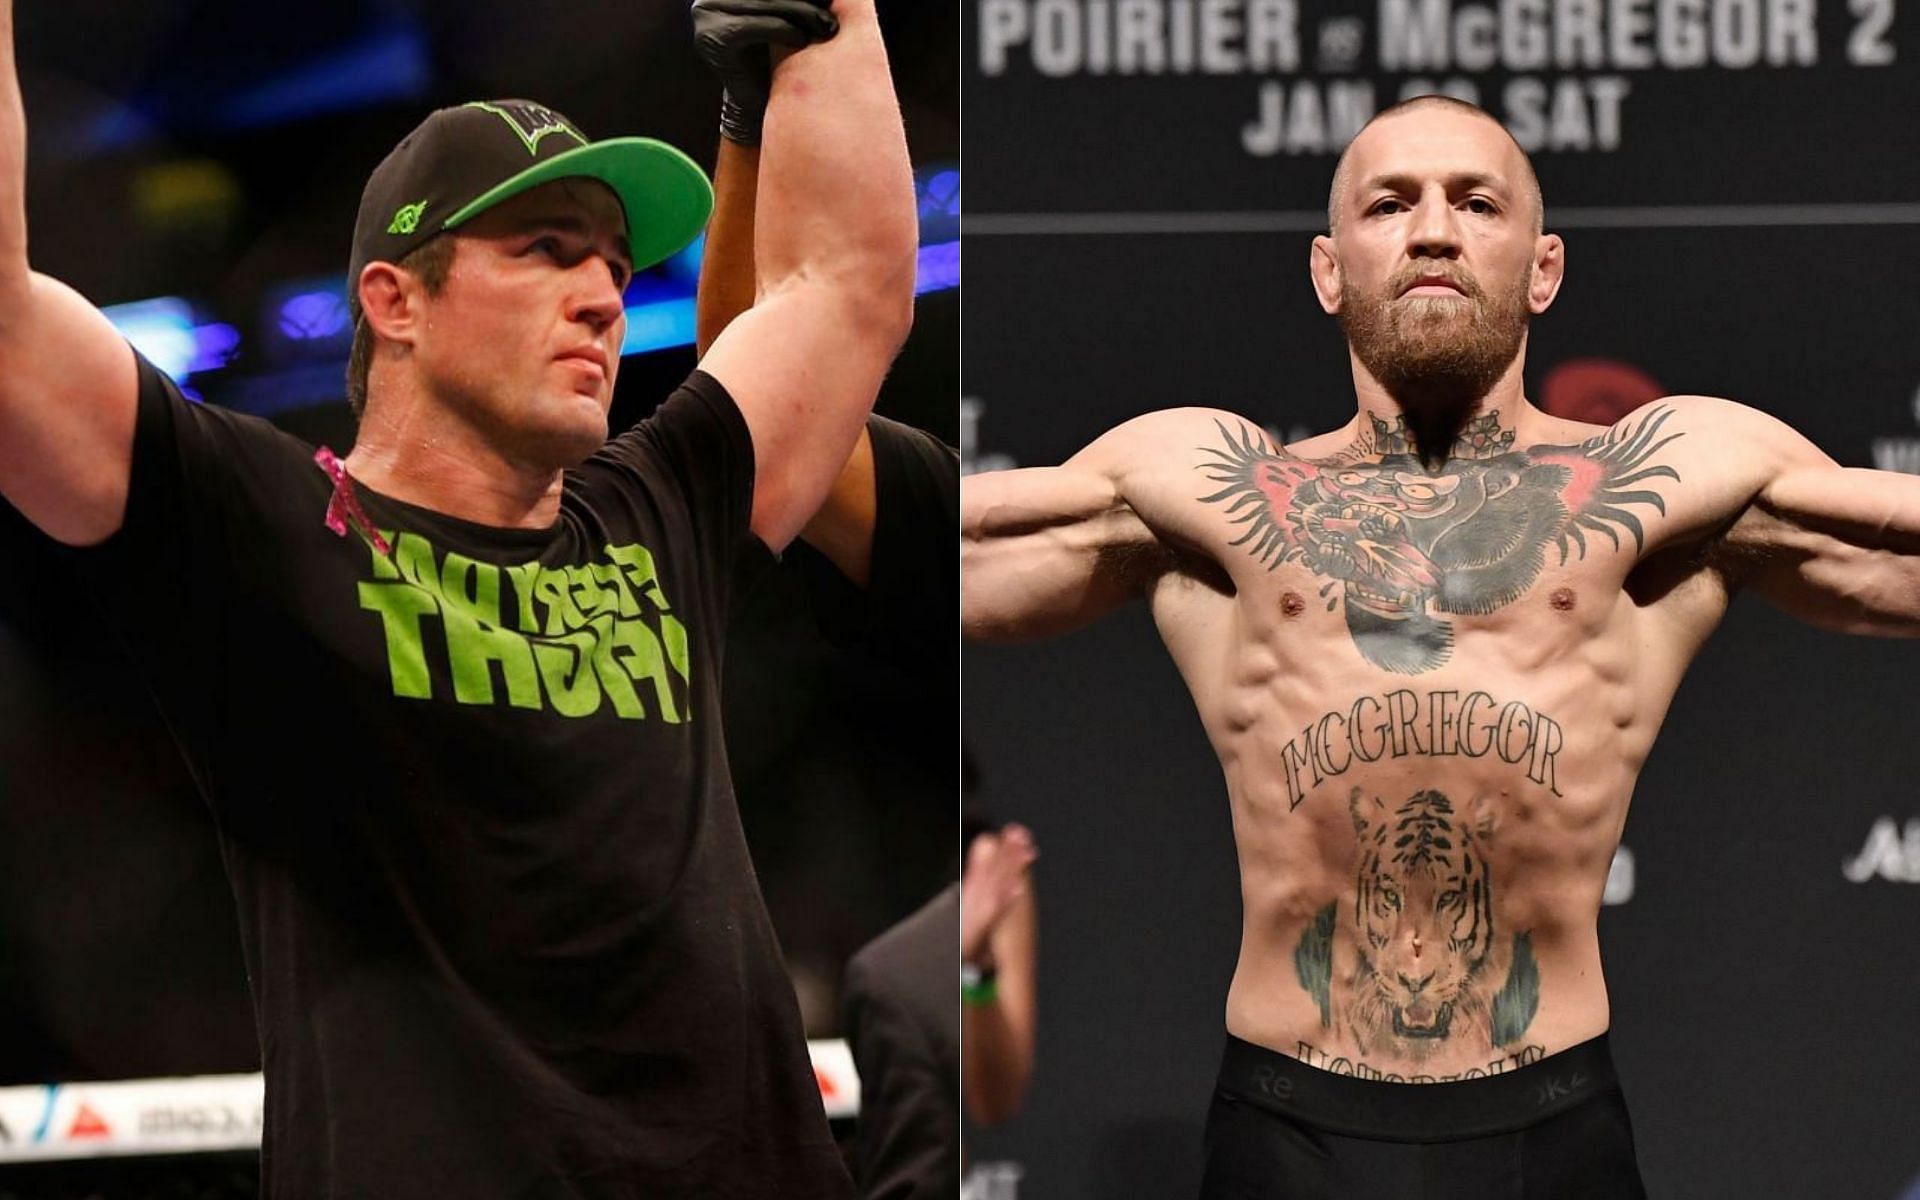 Chael Sonnen (left) and Conor McGregor (right)